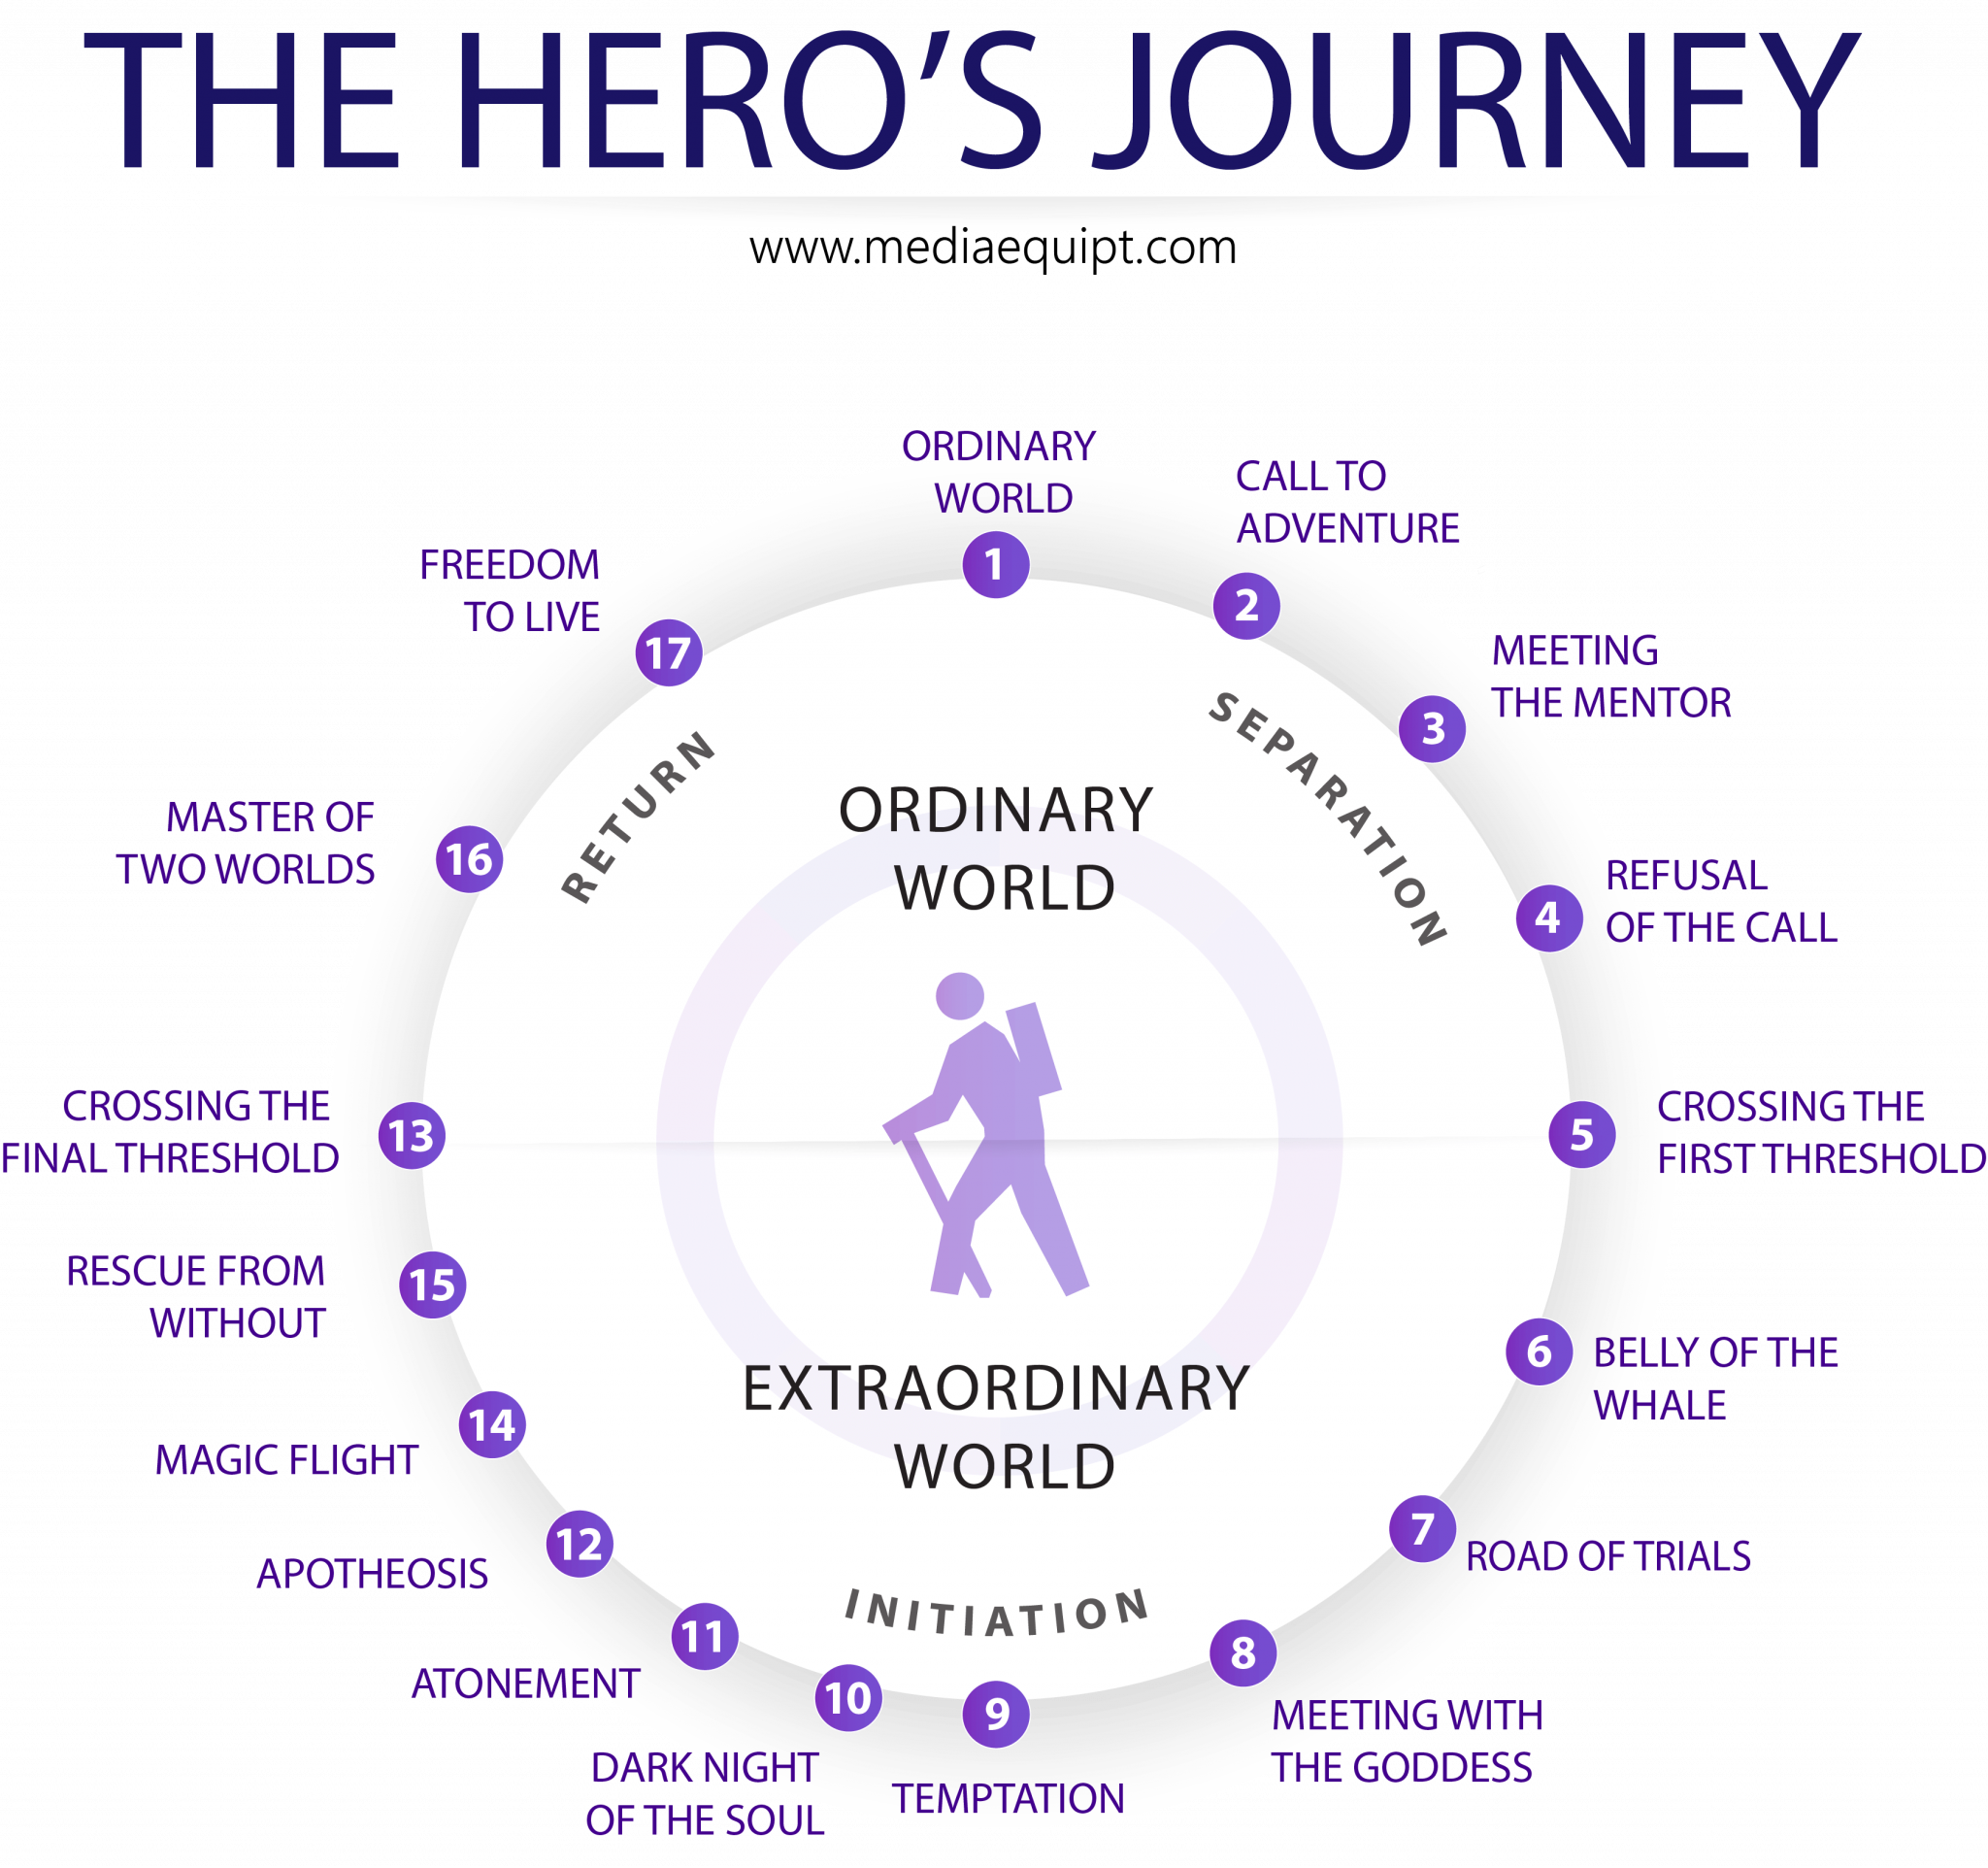 the hero's journey refers to the